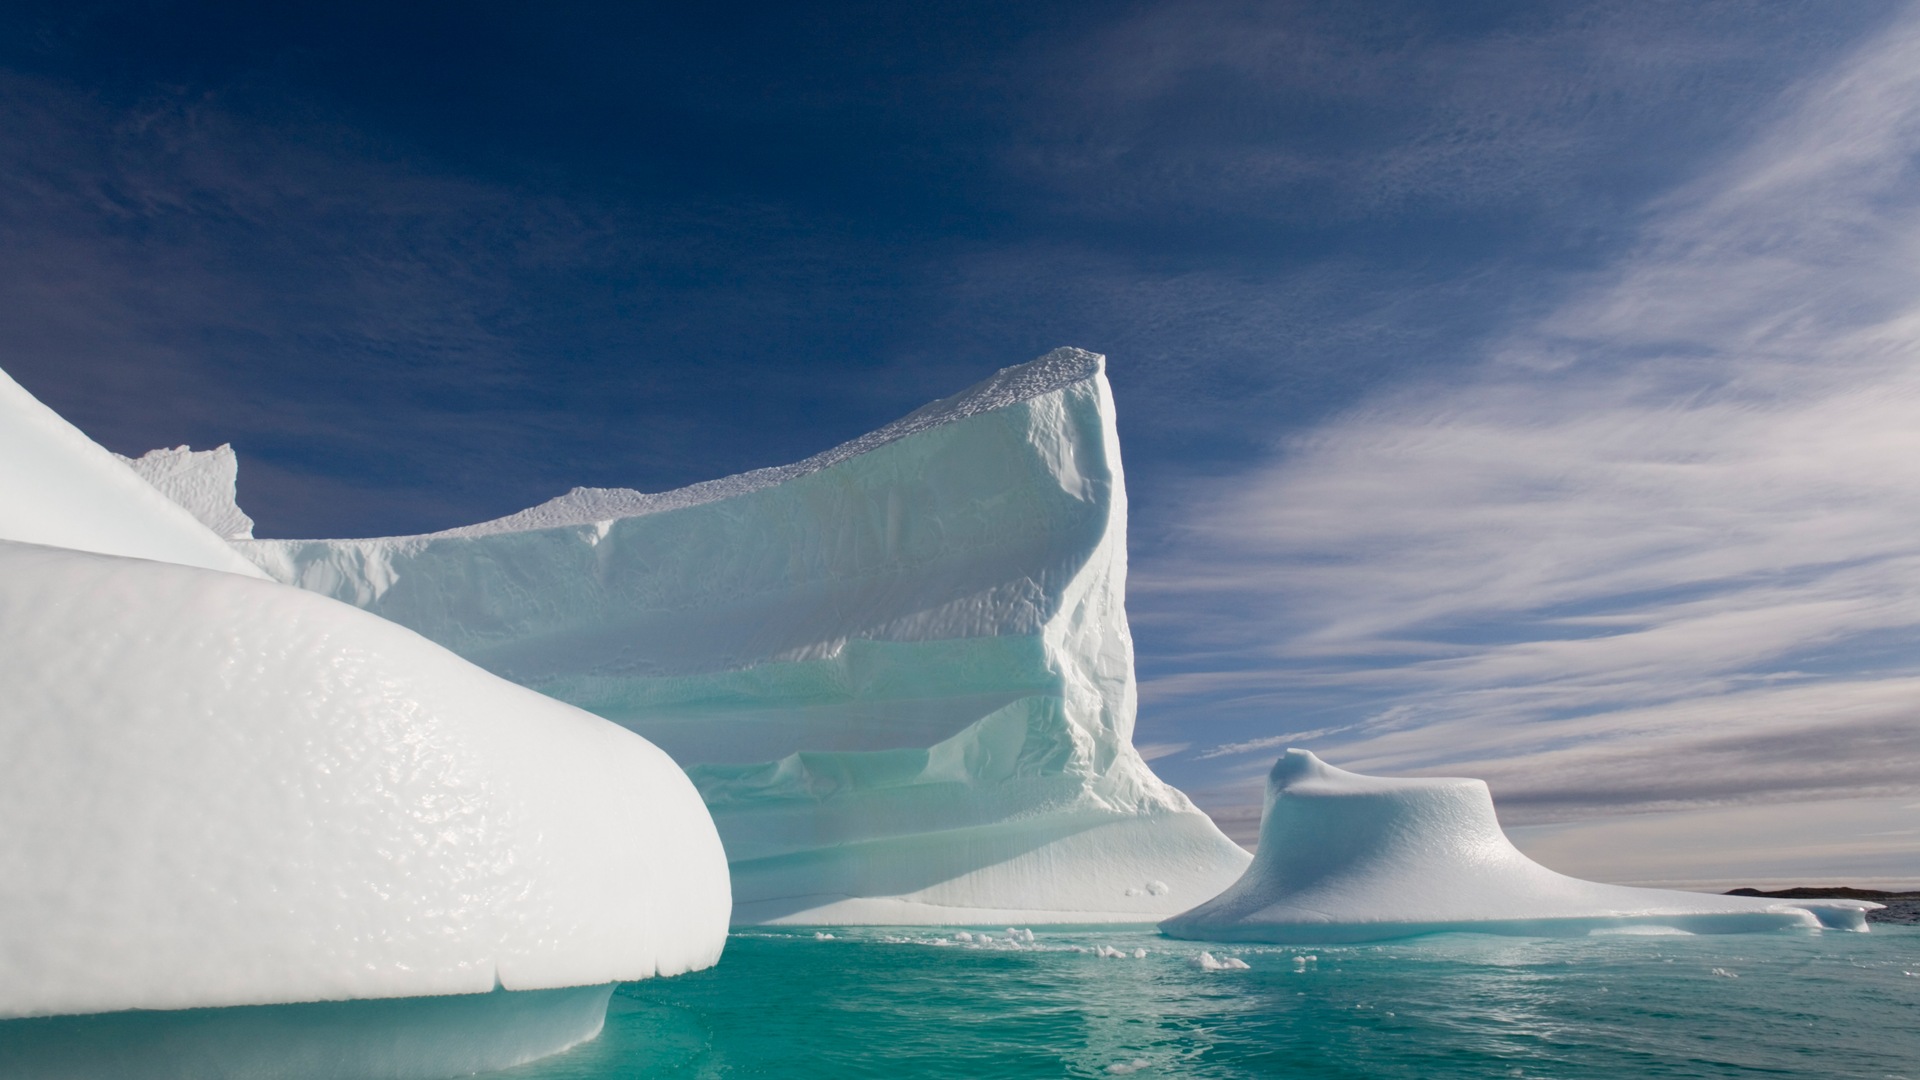 Windows 8 Wallpapers: Arctic, the nature ecological landscape, arctic animals #14 - 1920x1080